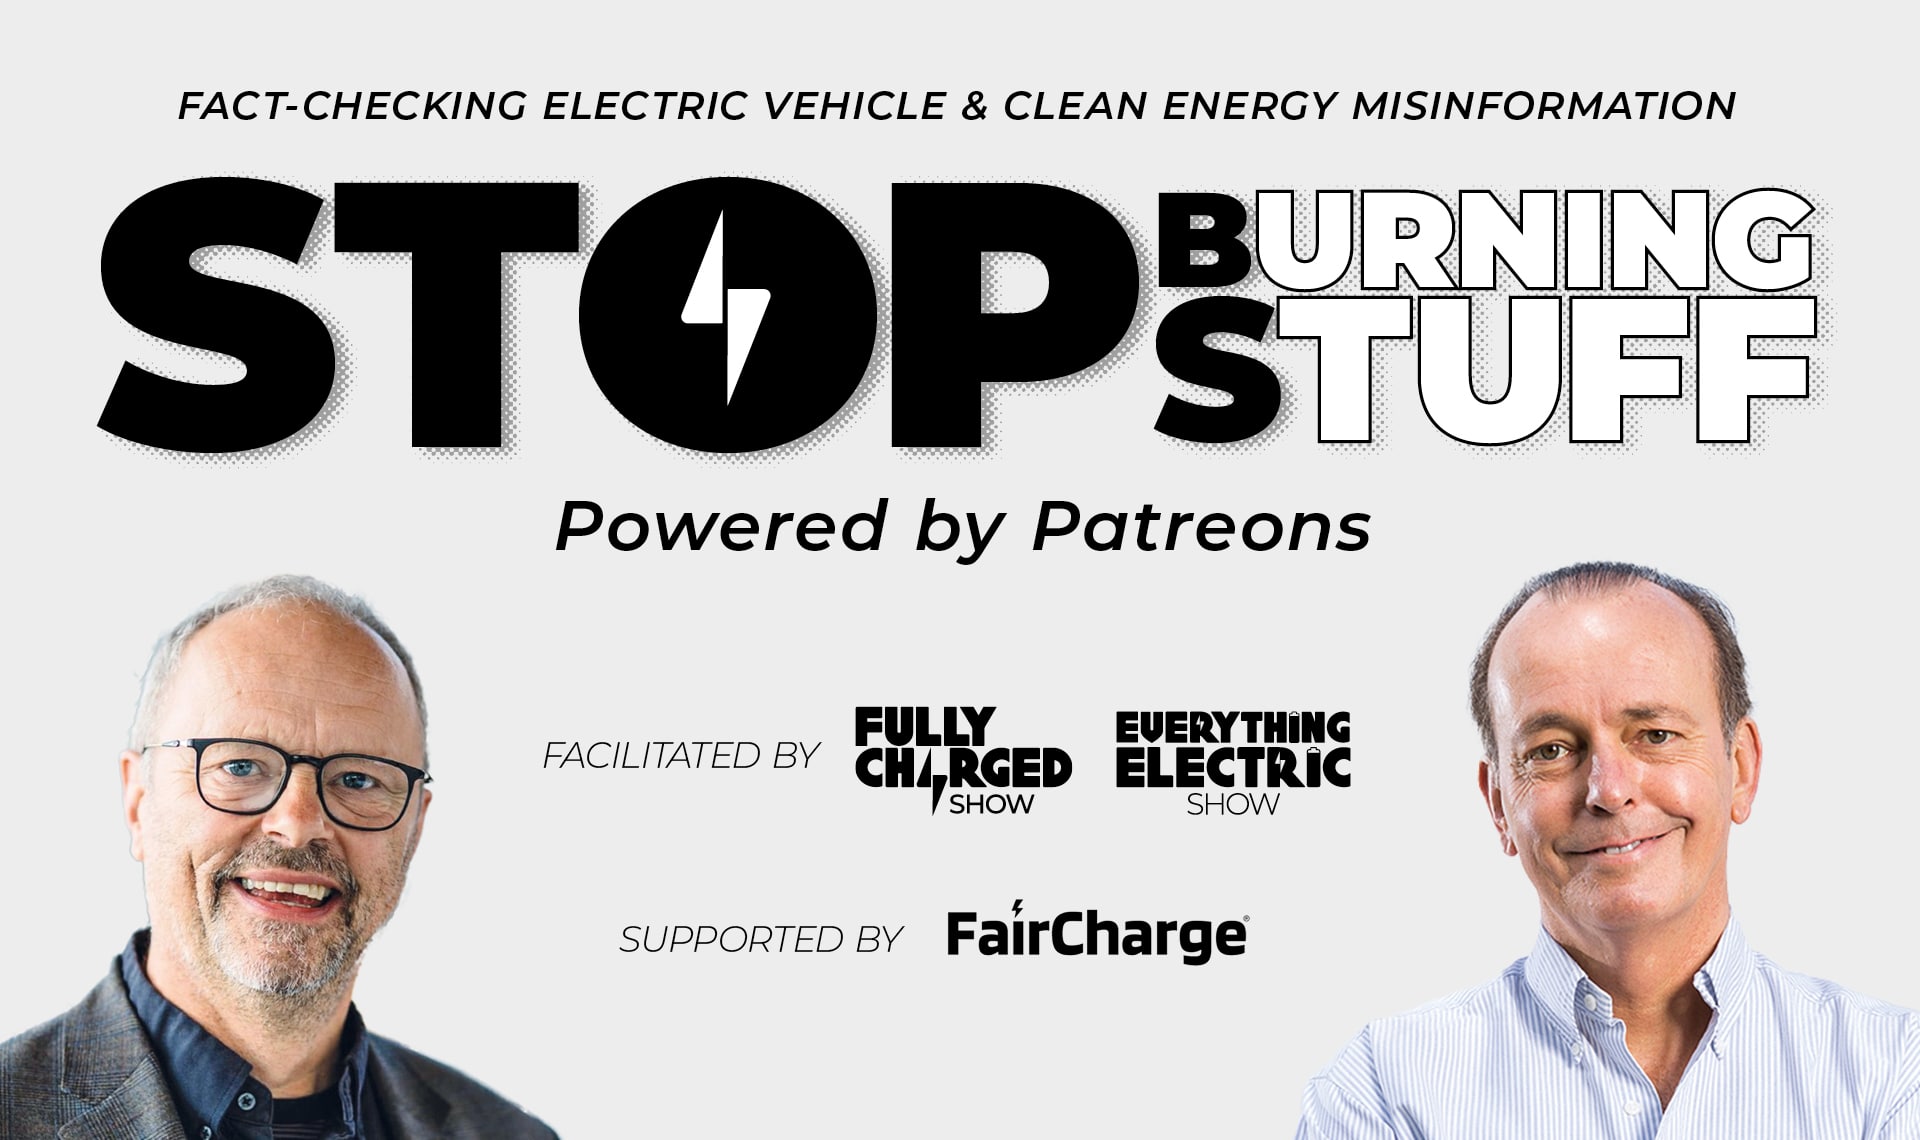 Stop Burning Stuff. Fact-checking Electric Vehicle & Clean Energy Misinformation